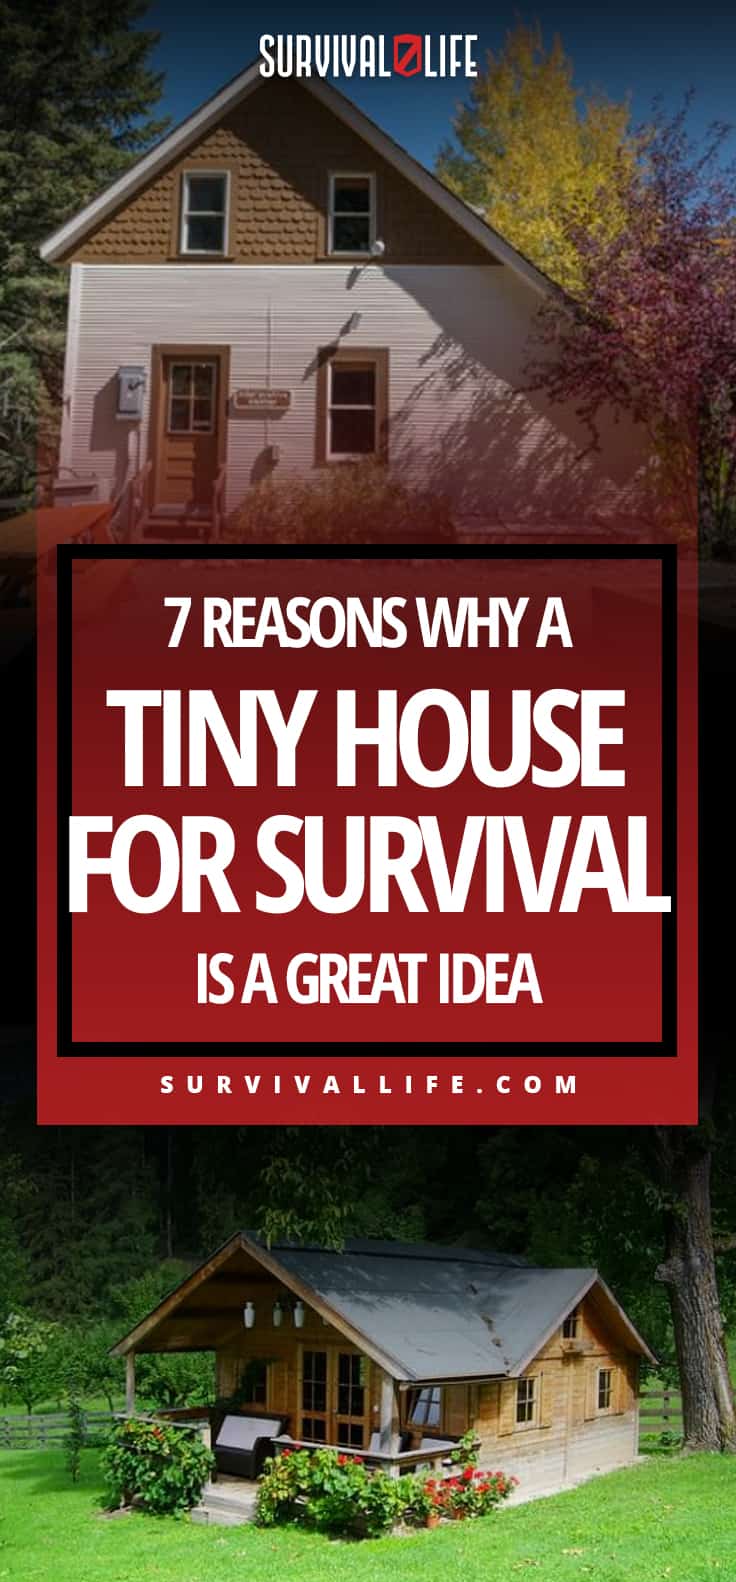 7 Reasons Why A Tiny House For Survival Is A Great Idea